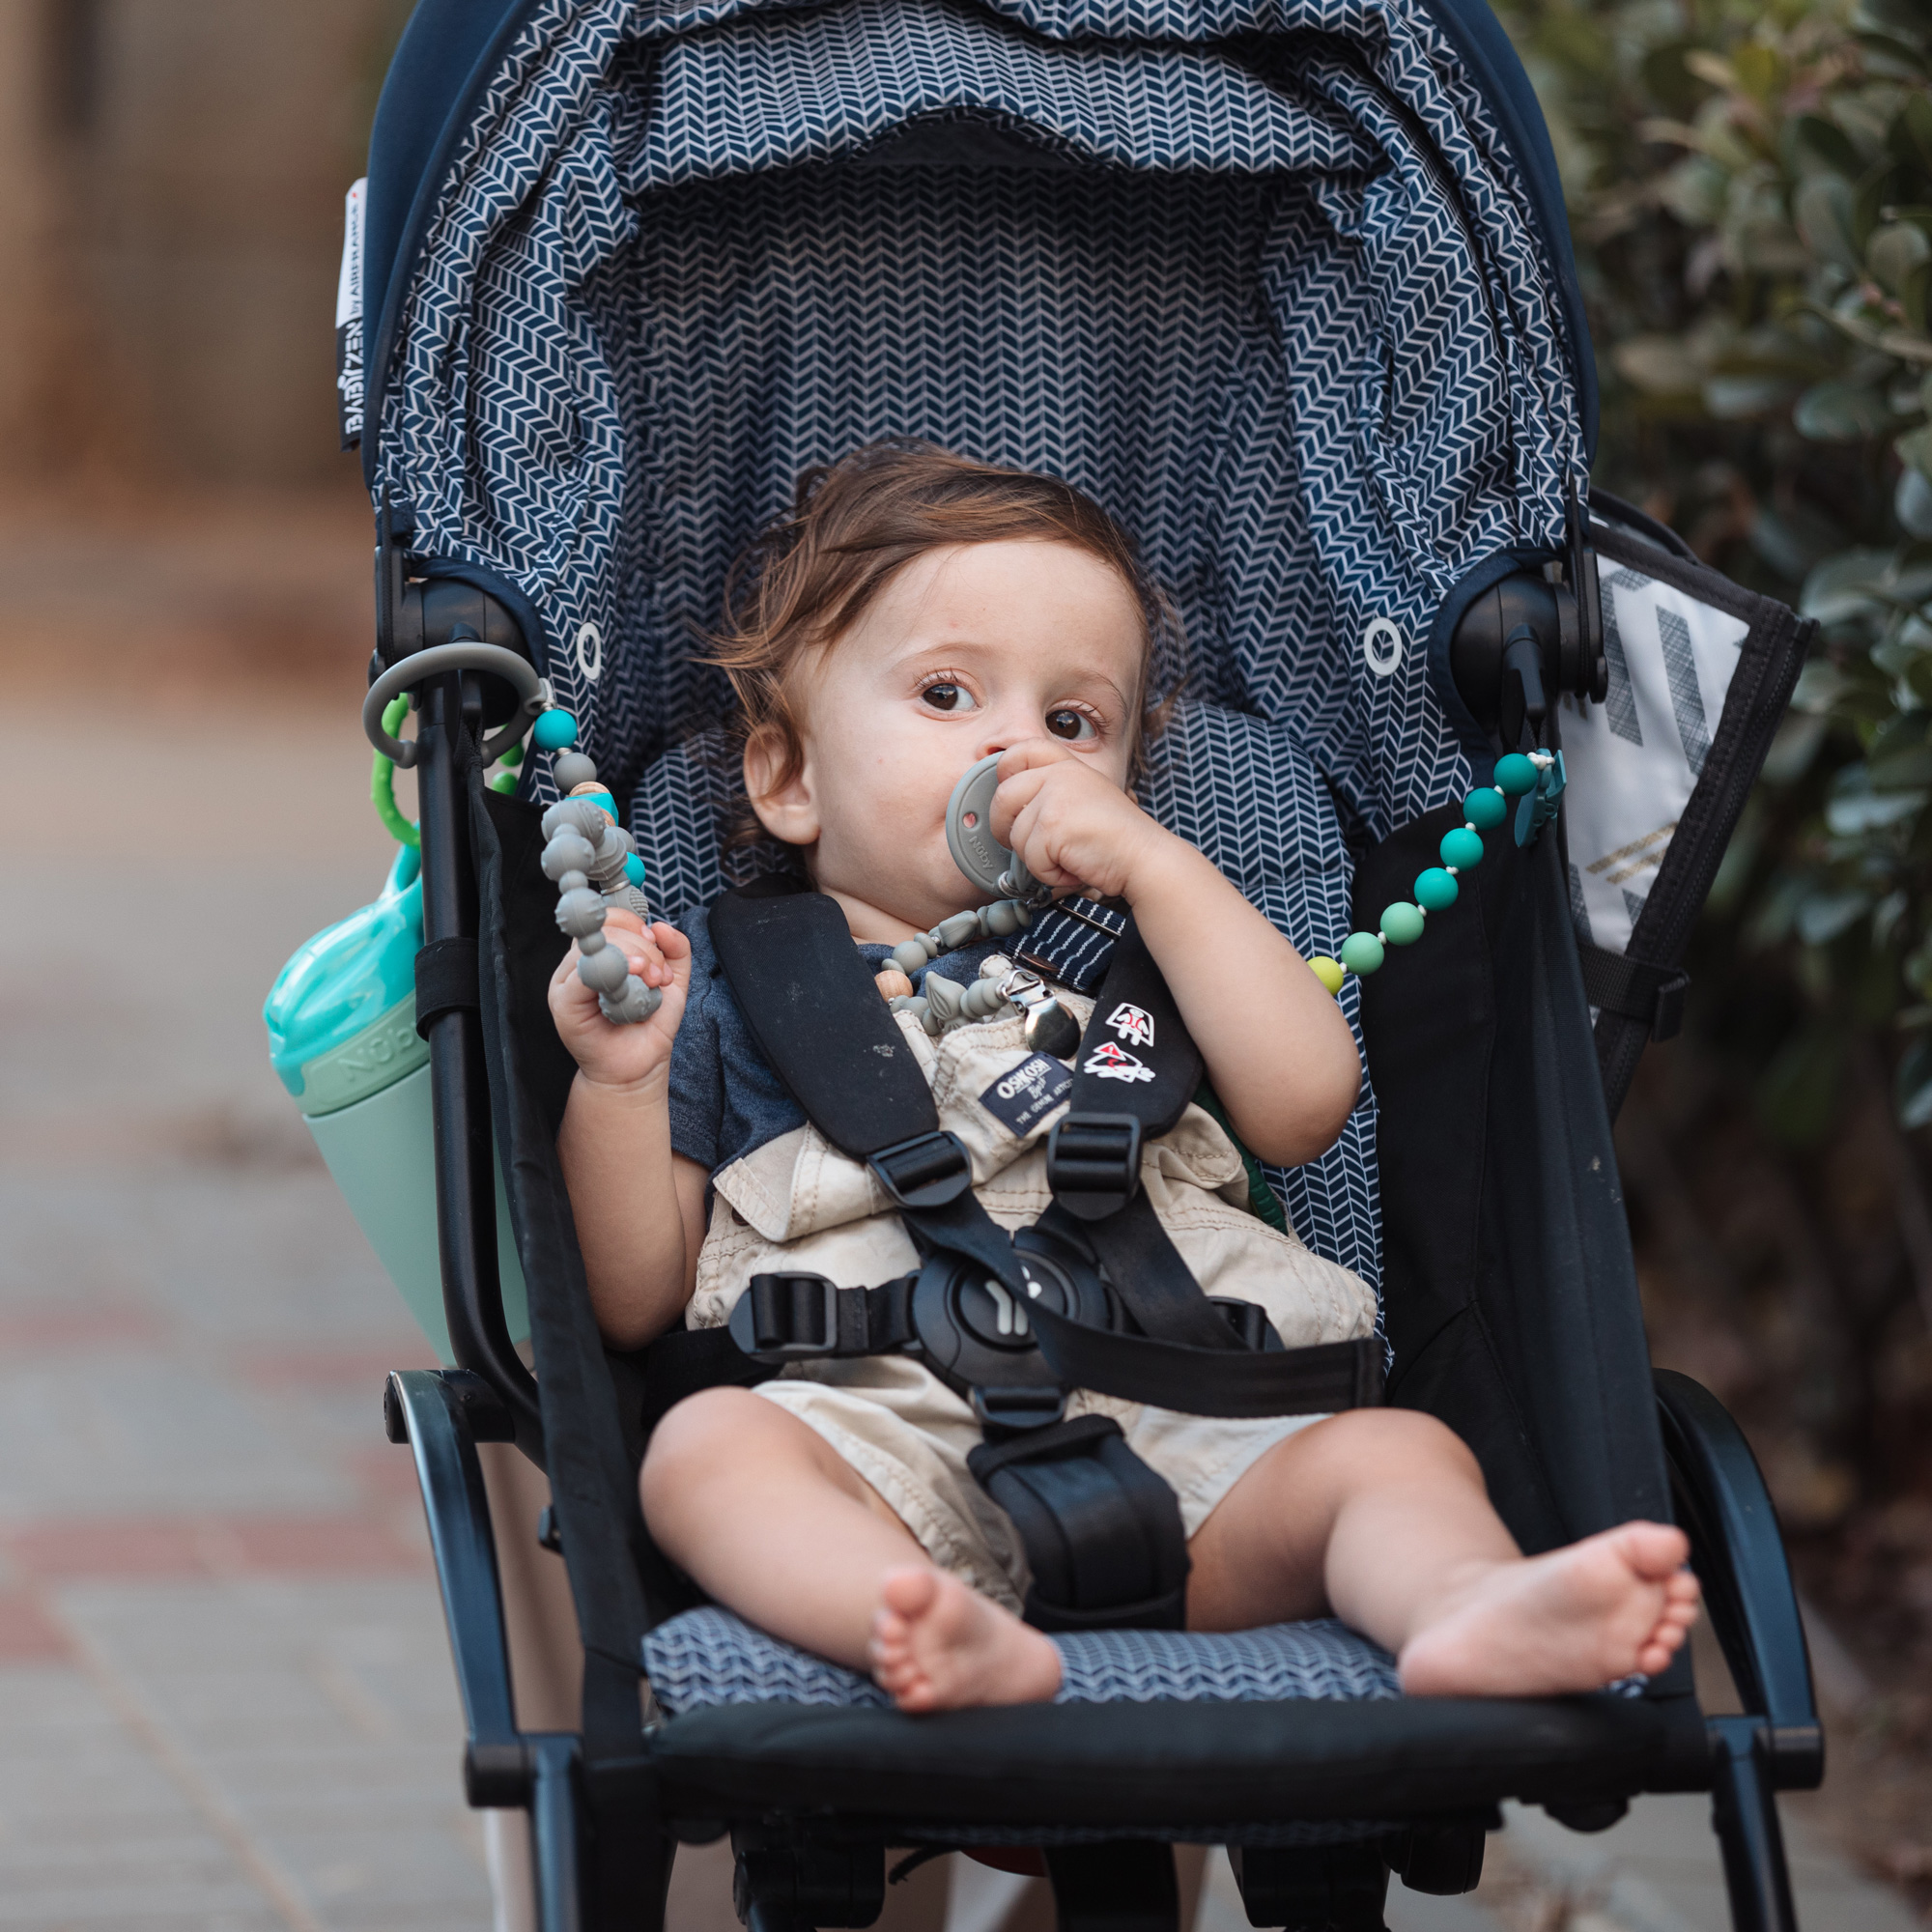 Baby with pacifier while riding a stroller